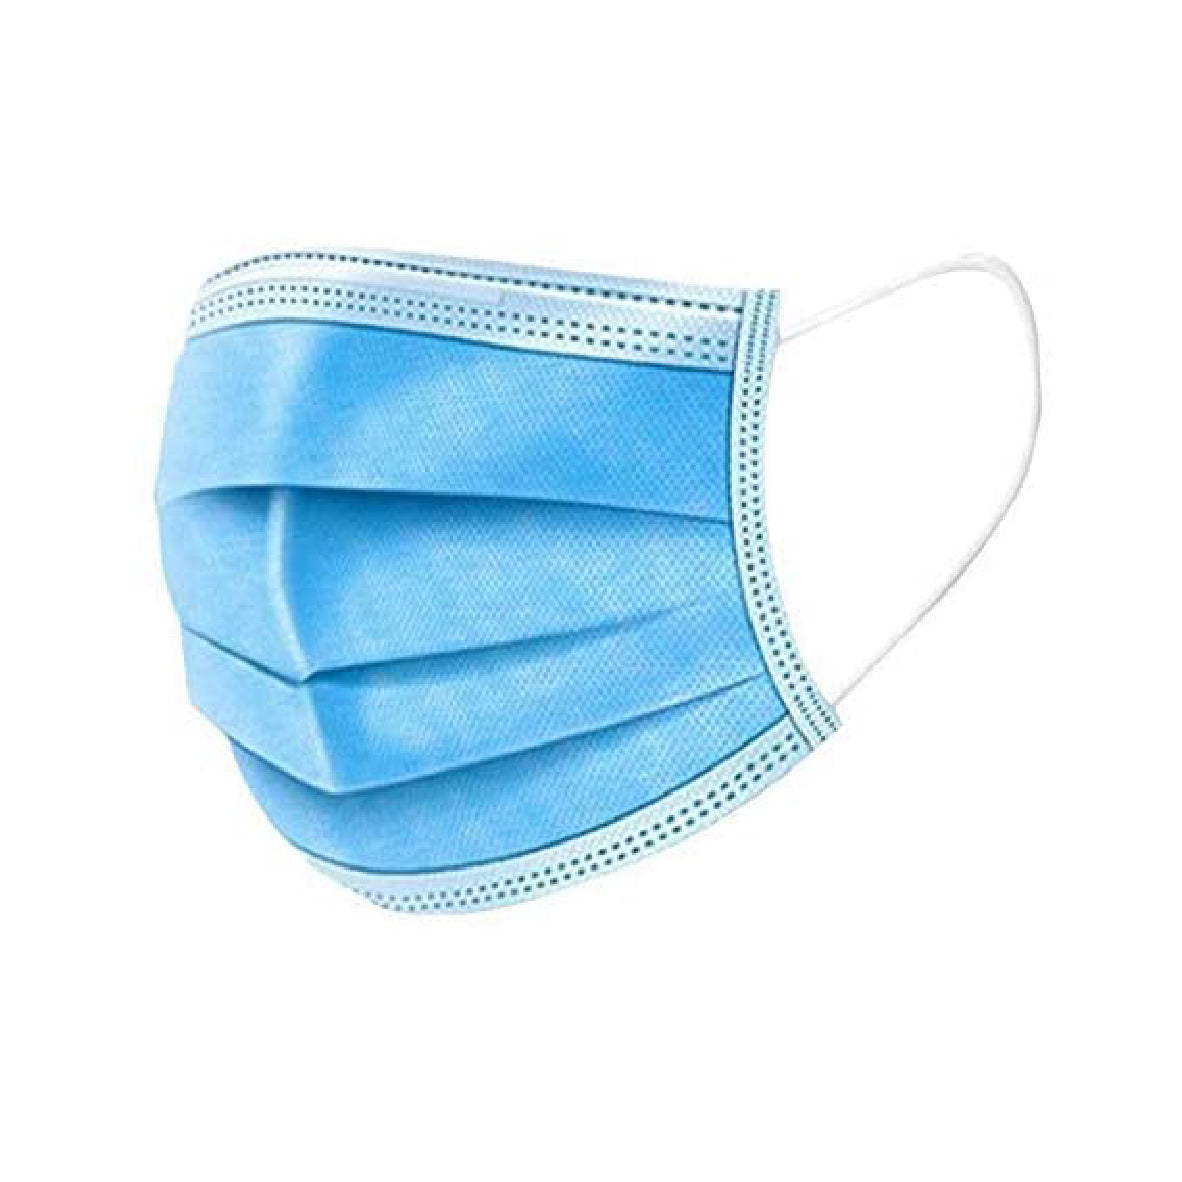 Disposable  Face Mask with Ear Loop 50 Count 3 Ply | Nose Allergy Dust Mask Filter Mask